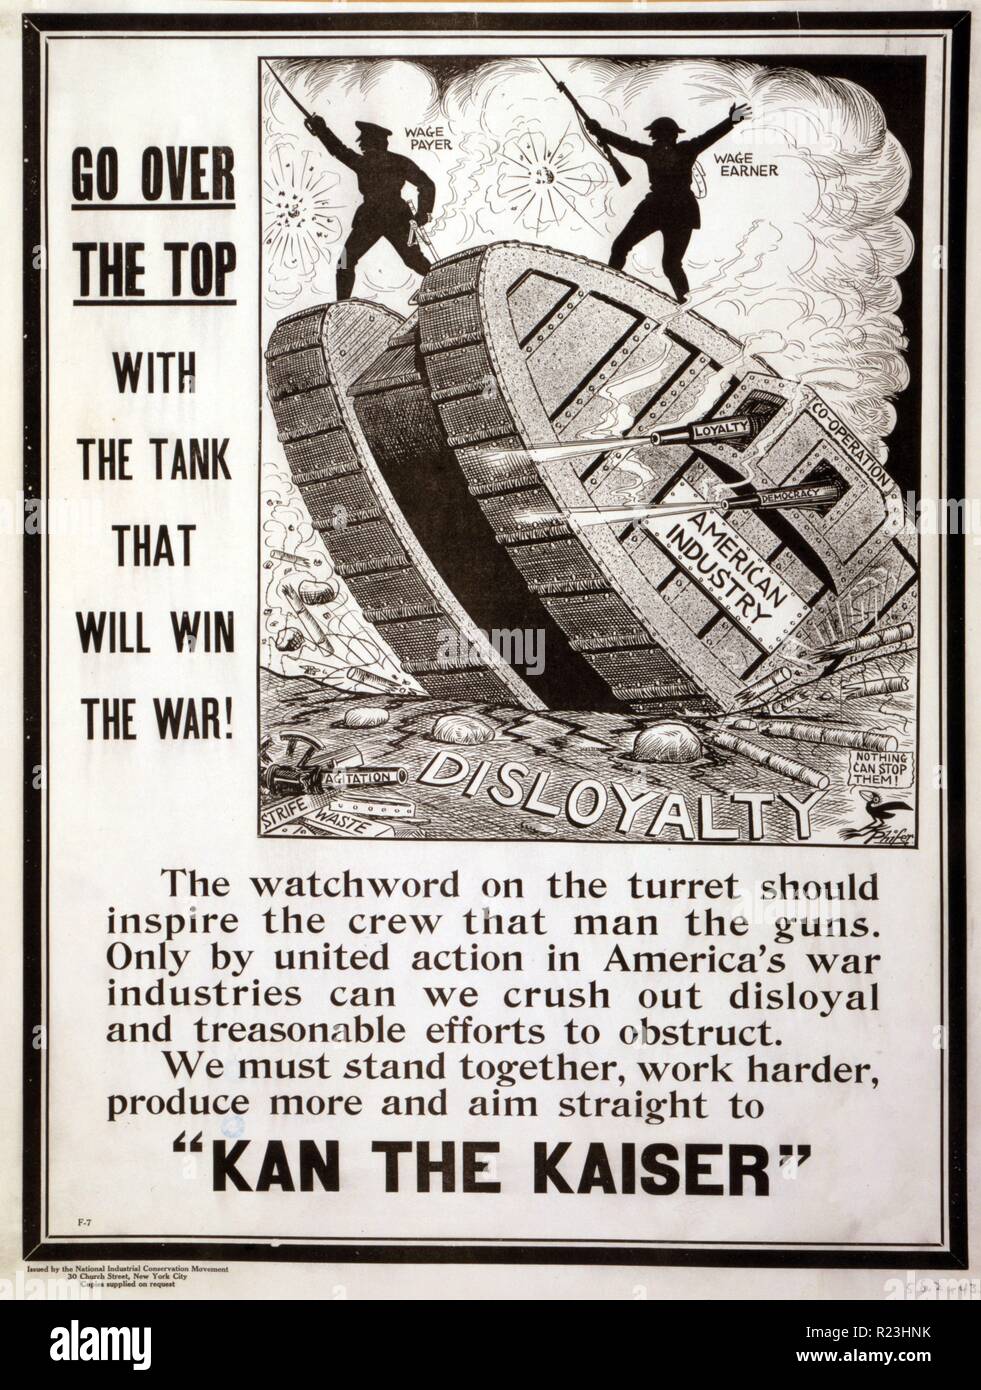 Go over the top with the tank that will win the war! Poster showing a tank 'American industry' rolling over 'Disloyalty'. Text says the watchword on the turret should inspire the crew that man the guns. Only by united action in America's war industries can we crush out disloyal and treasonable efforts to obstruct. We must stand together, work harder, produce more and aim straight to 'Kan the Kaiser.' 1917 Stock Photo